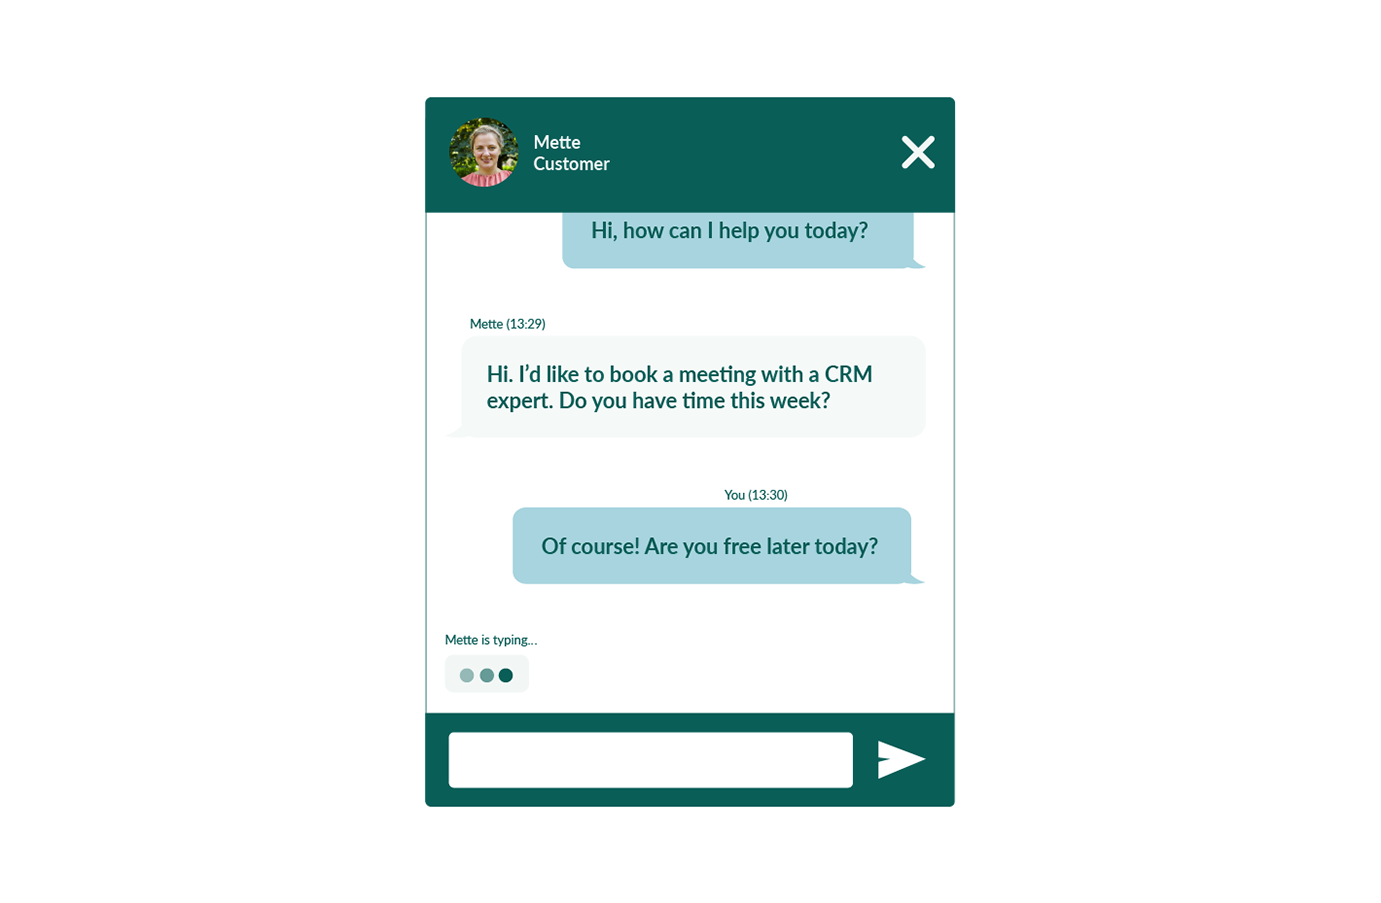 Speak with prospects via live chat